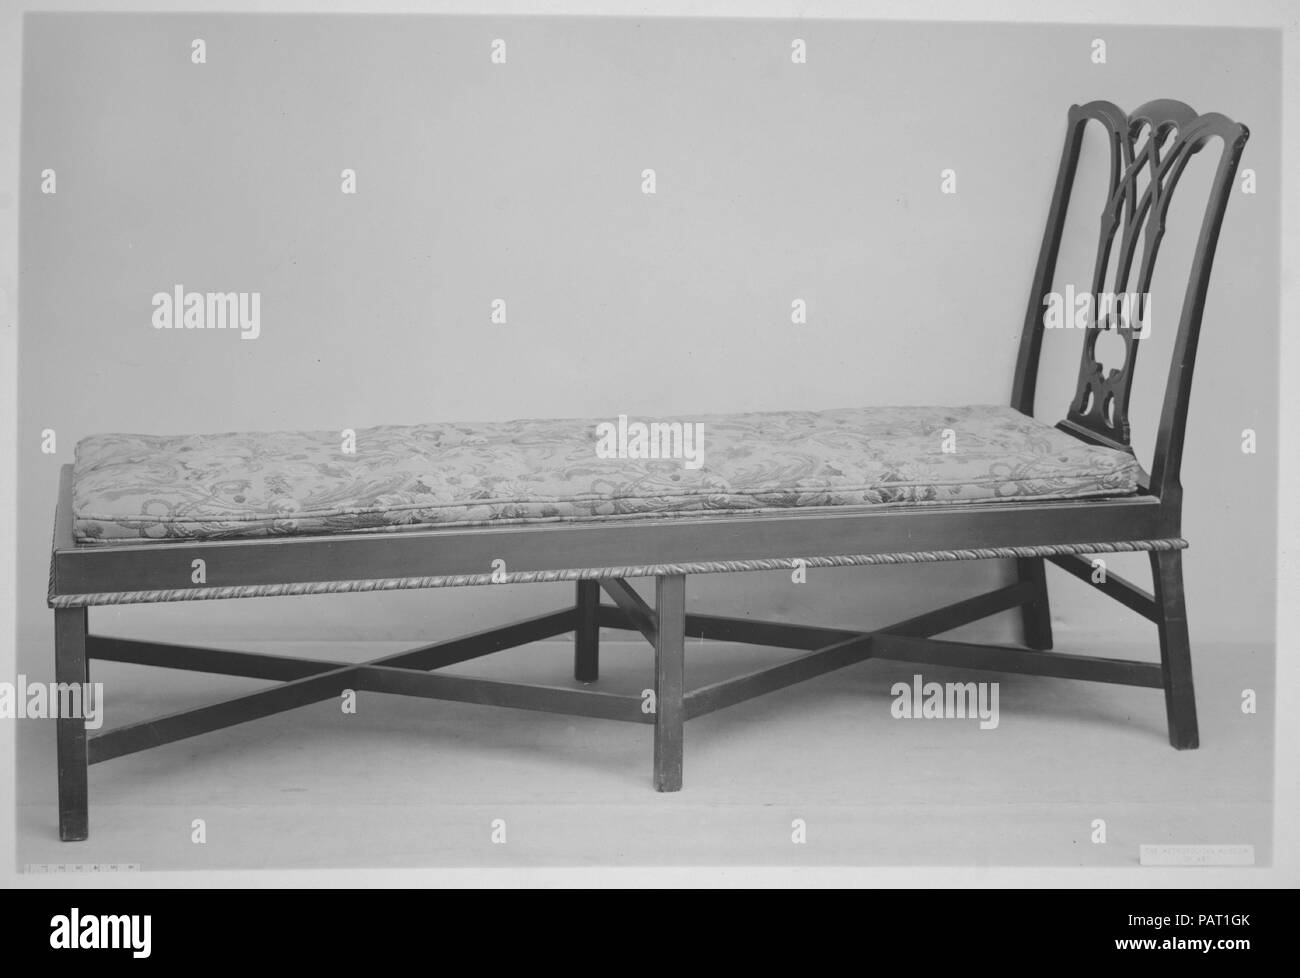 Daybed. Culture: American. Dimensions: 43 1/2 x 24 7/8 x 74 1/2 in. (110.5 x 63.2 x 189.2 cm). Date: 1760-90. Museum: Metropolitan Museum of Art, New York, USA. Stock Photo